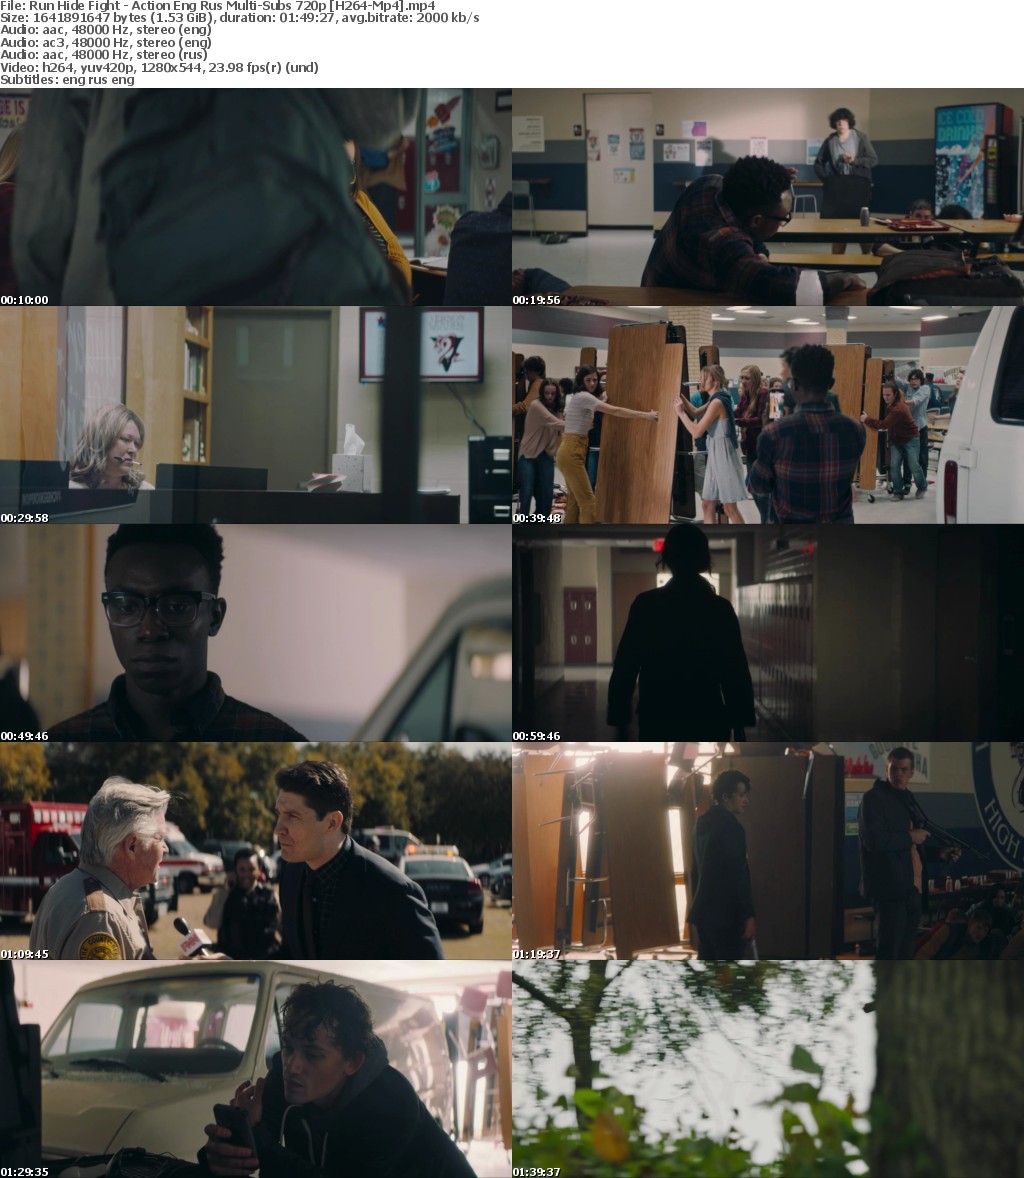 Run Hide Fight - Action Eng Rus Multi-Subs 720p H264-Mp4